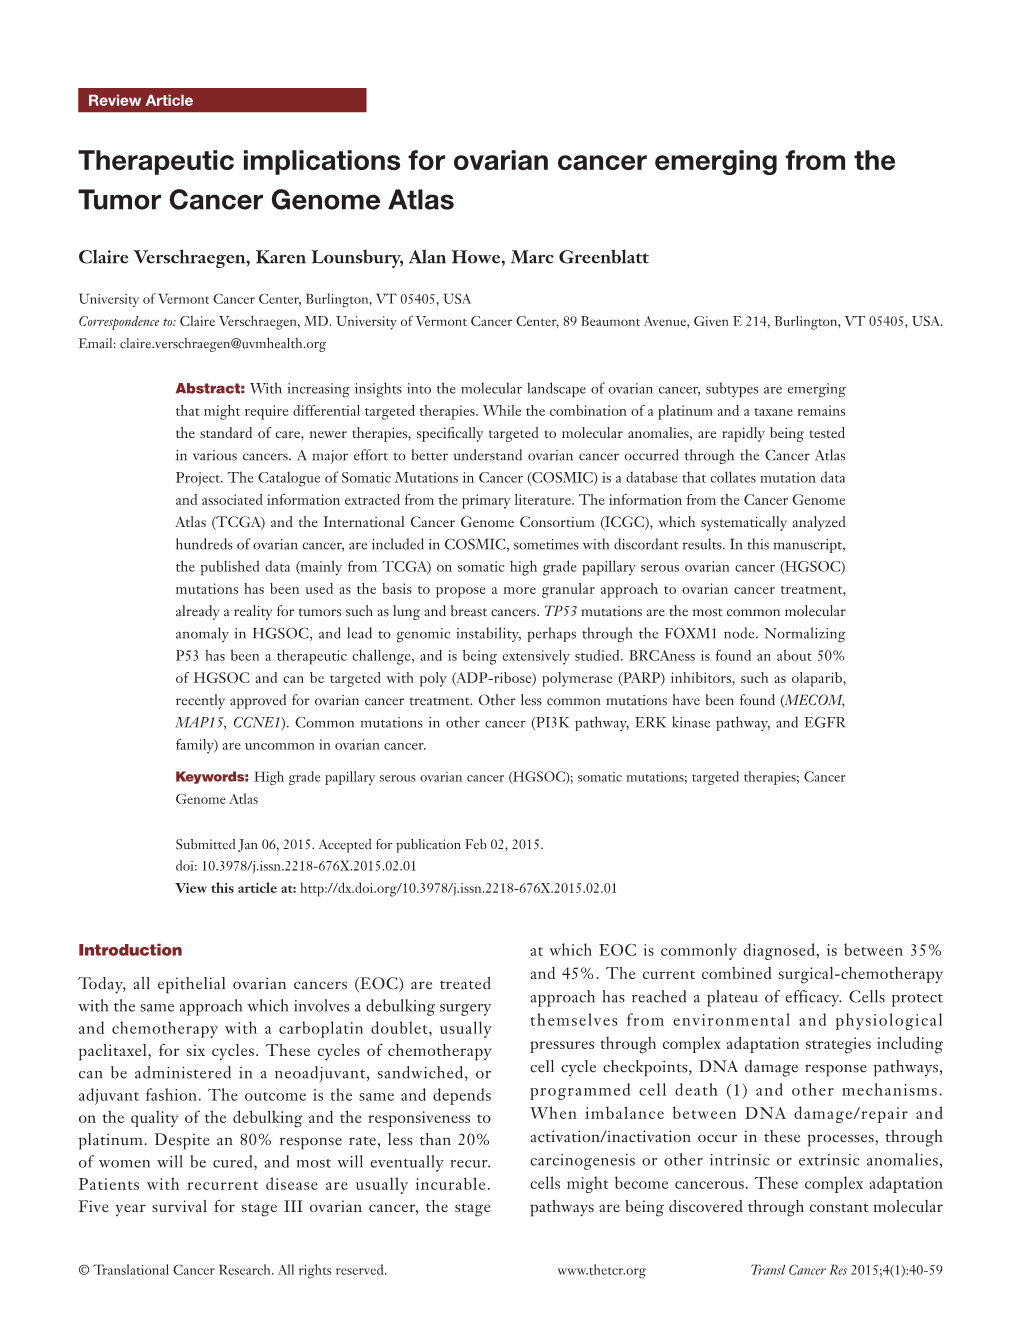 Therapeutic Implications for Ovarian Cancer Emerging from the Tumor Cancer Genome Atlas